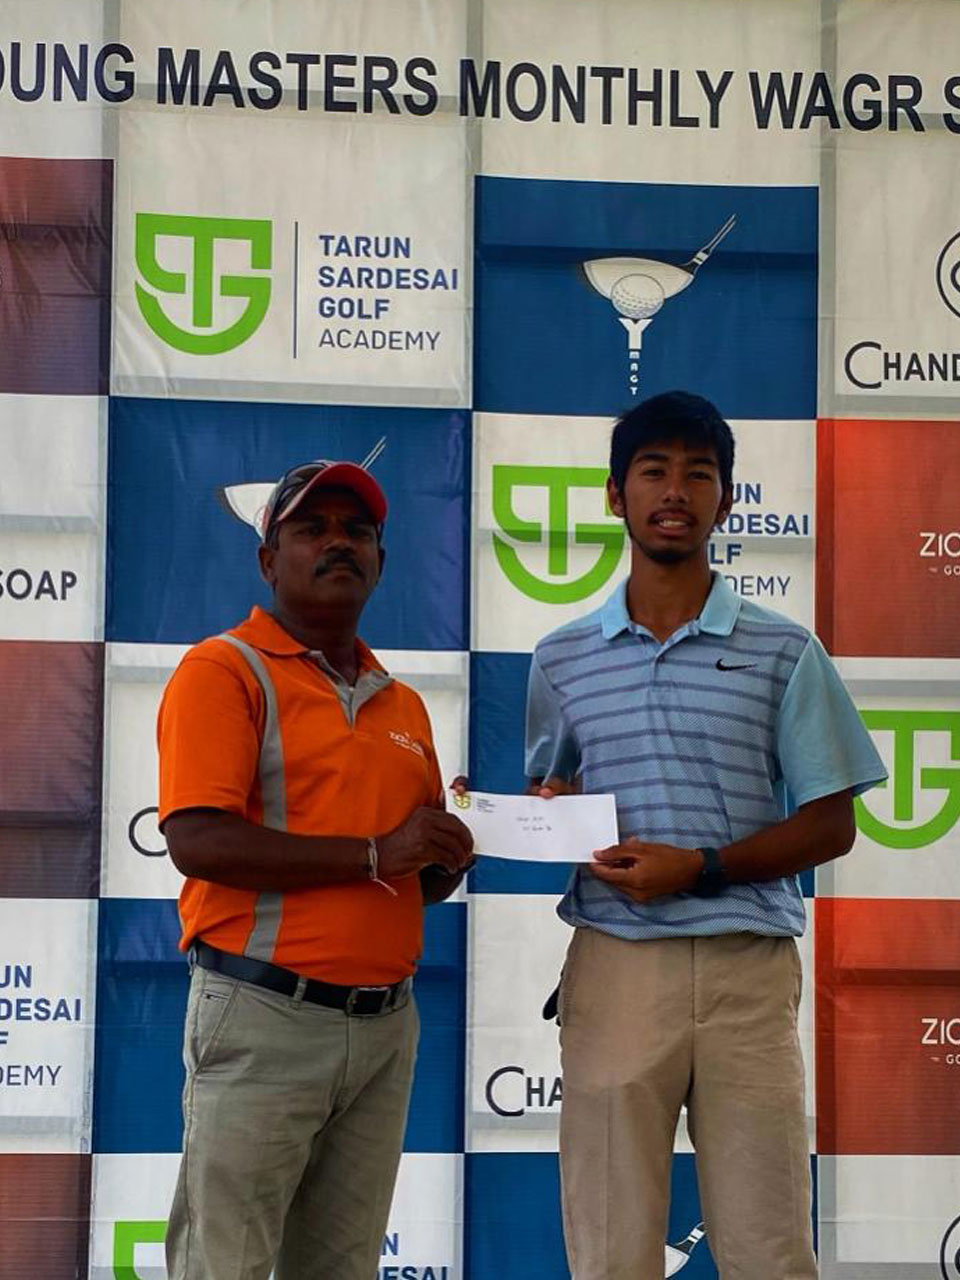 Sadbhav Acharya finished 3rd in Men's Open Amateur Category